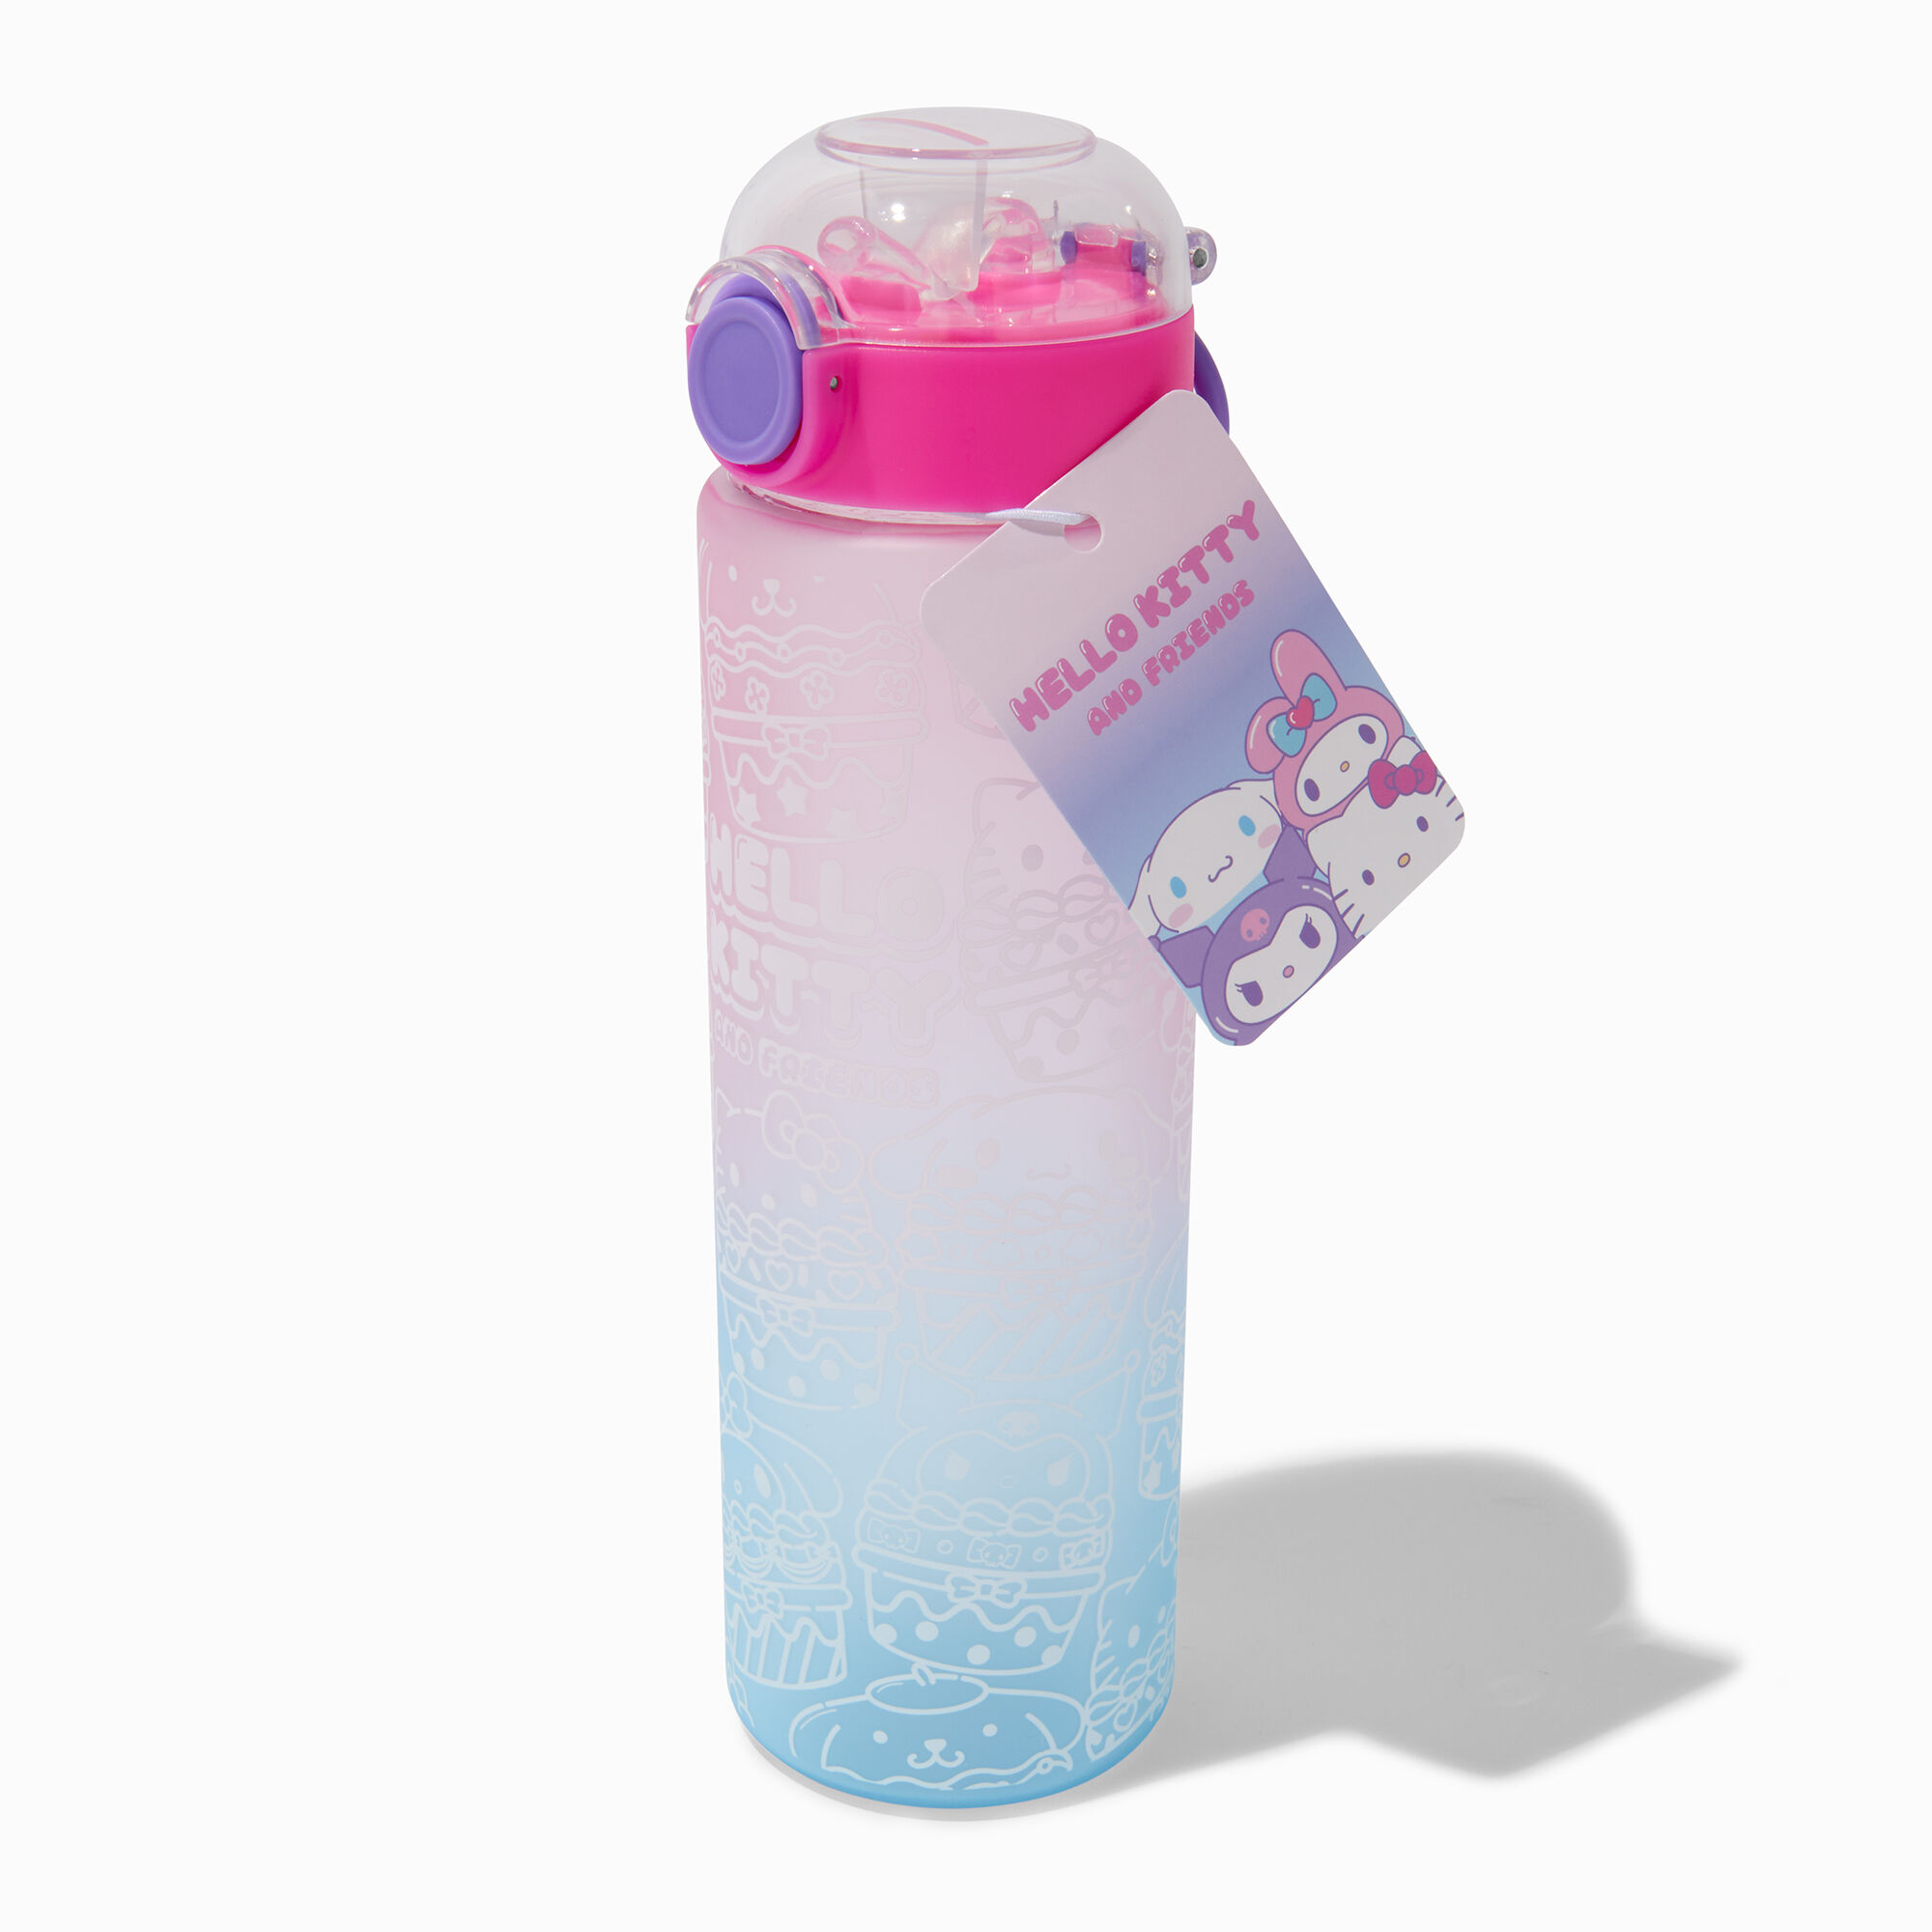 View Claires Hello Kitty And Friends Water Bottle information